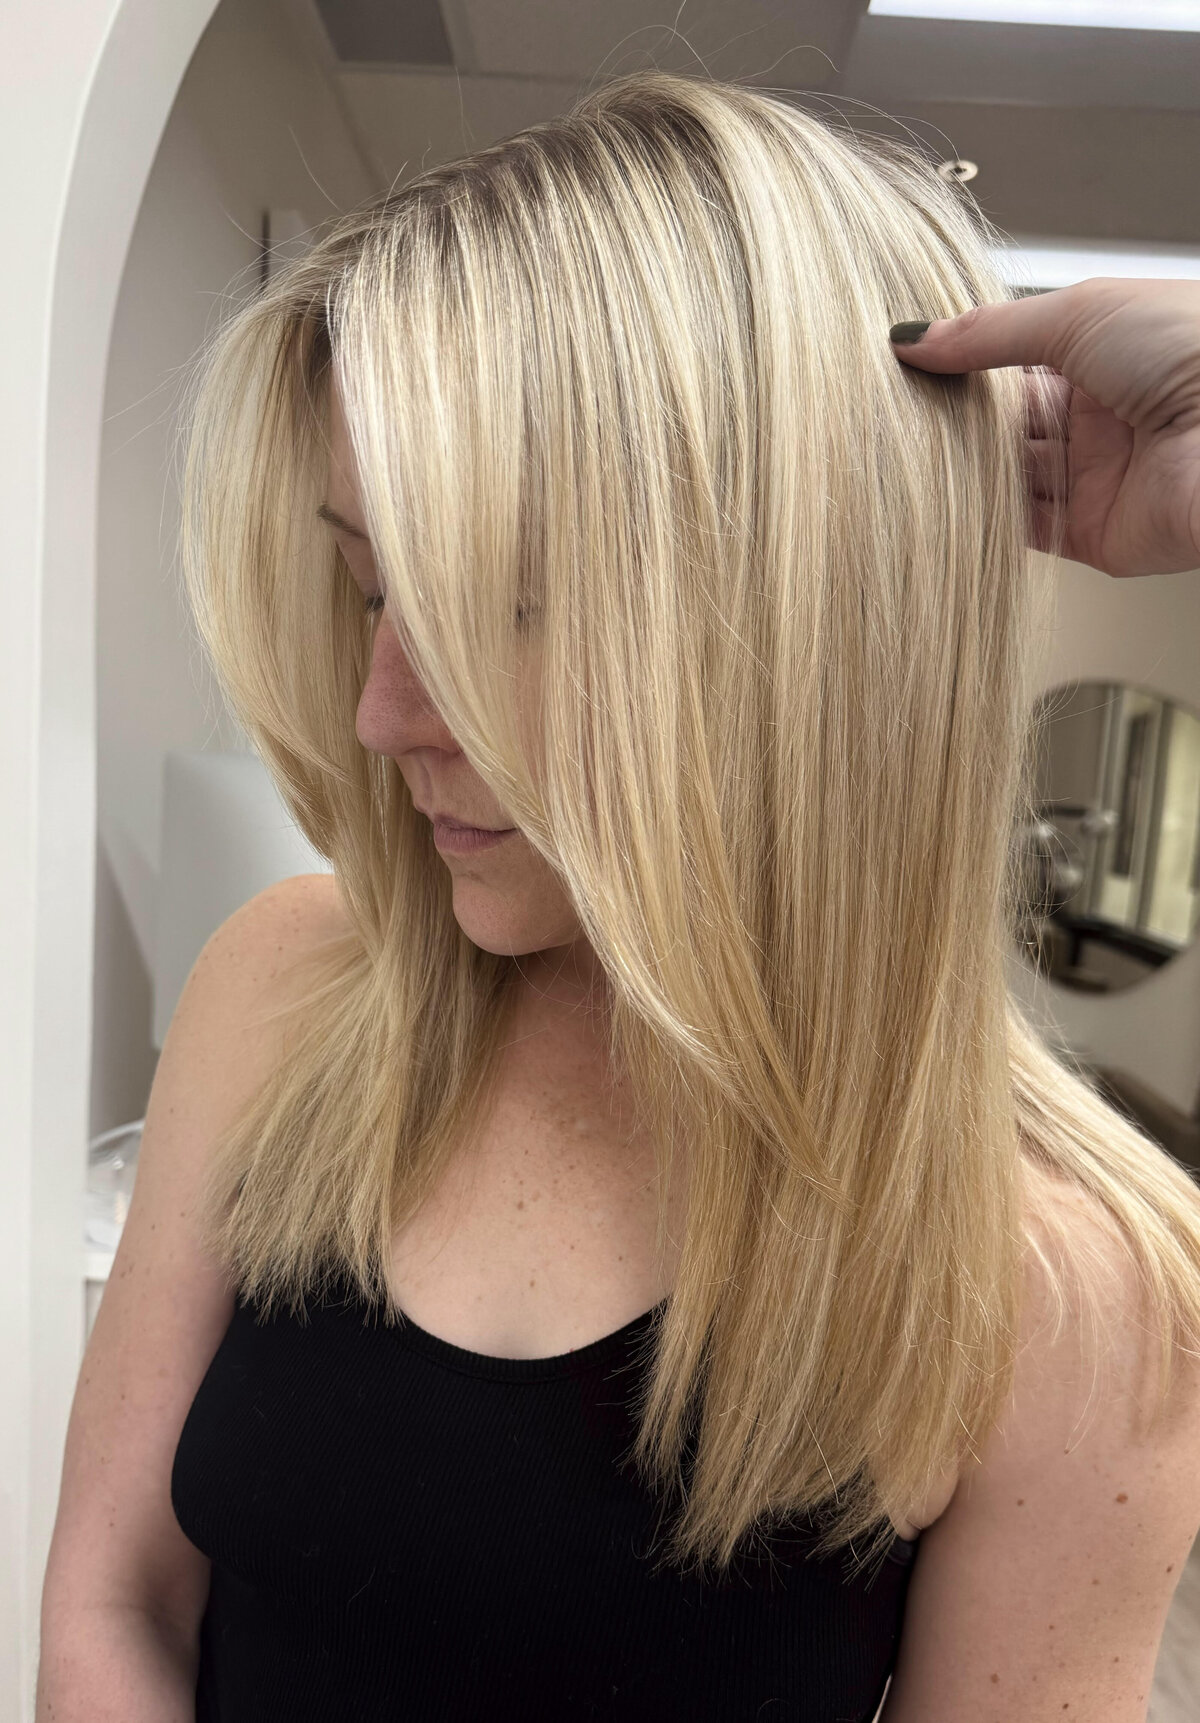 Nova Strands Salon: Where blonde dreams become reality. Discover flawless hues and expert styling.